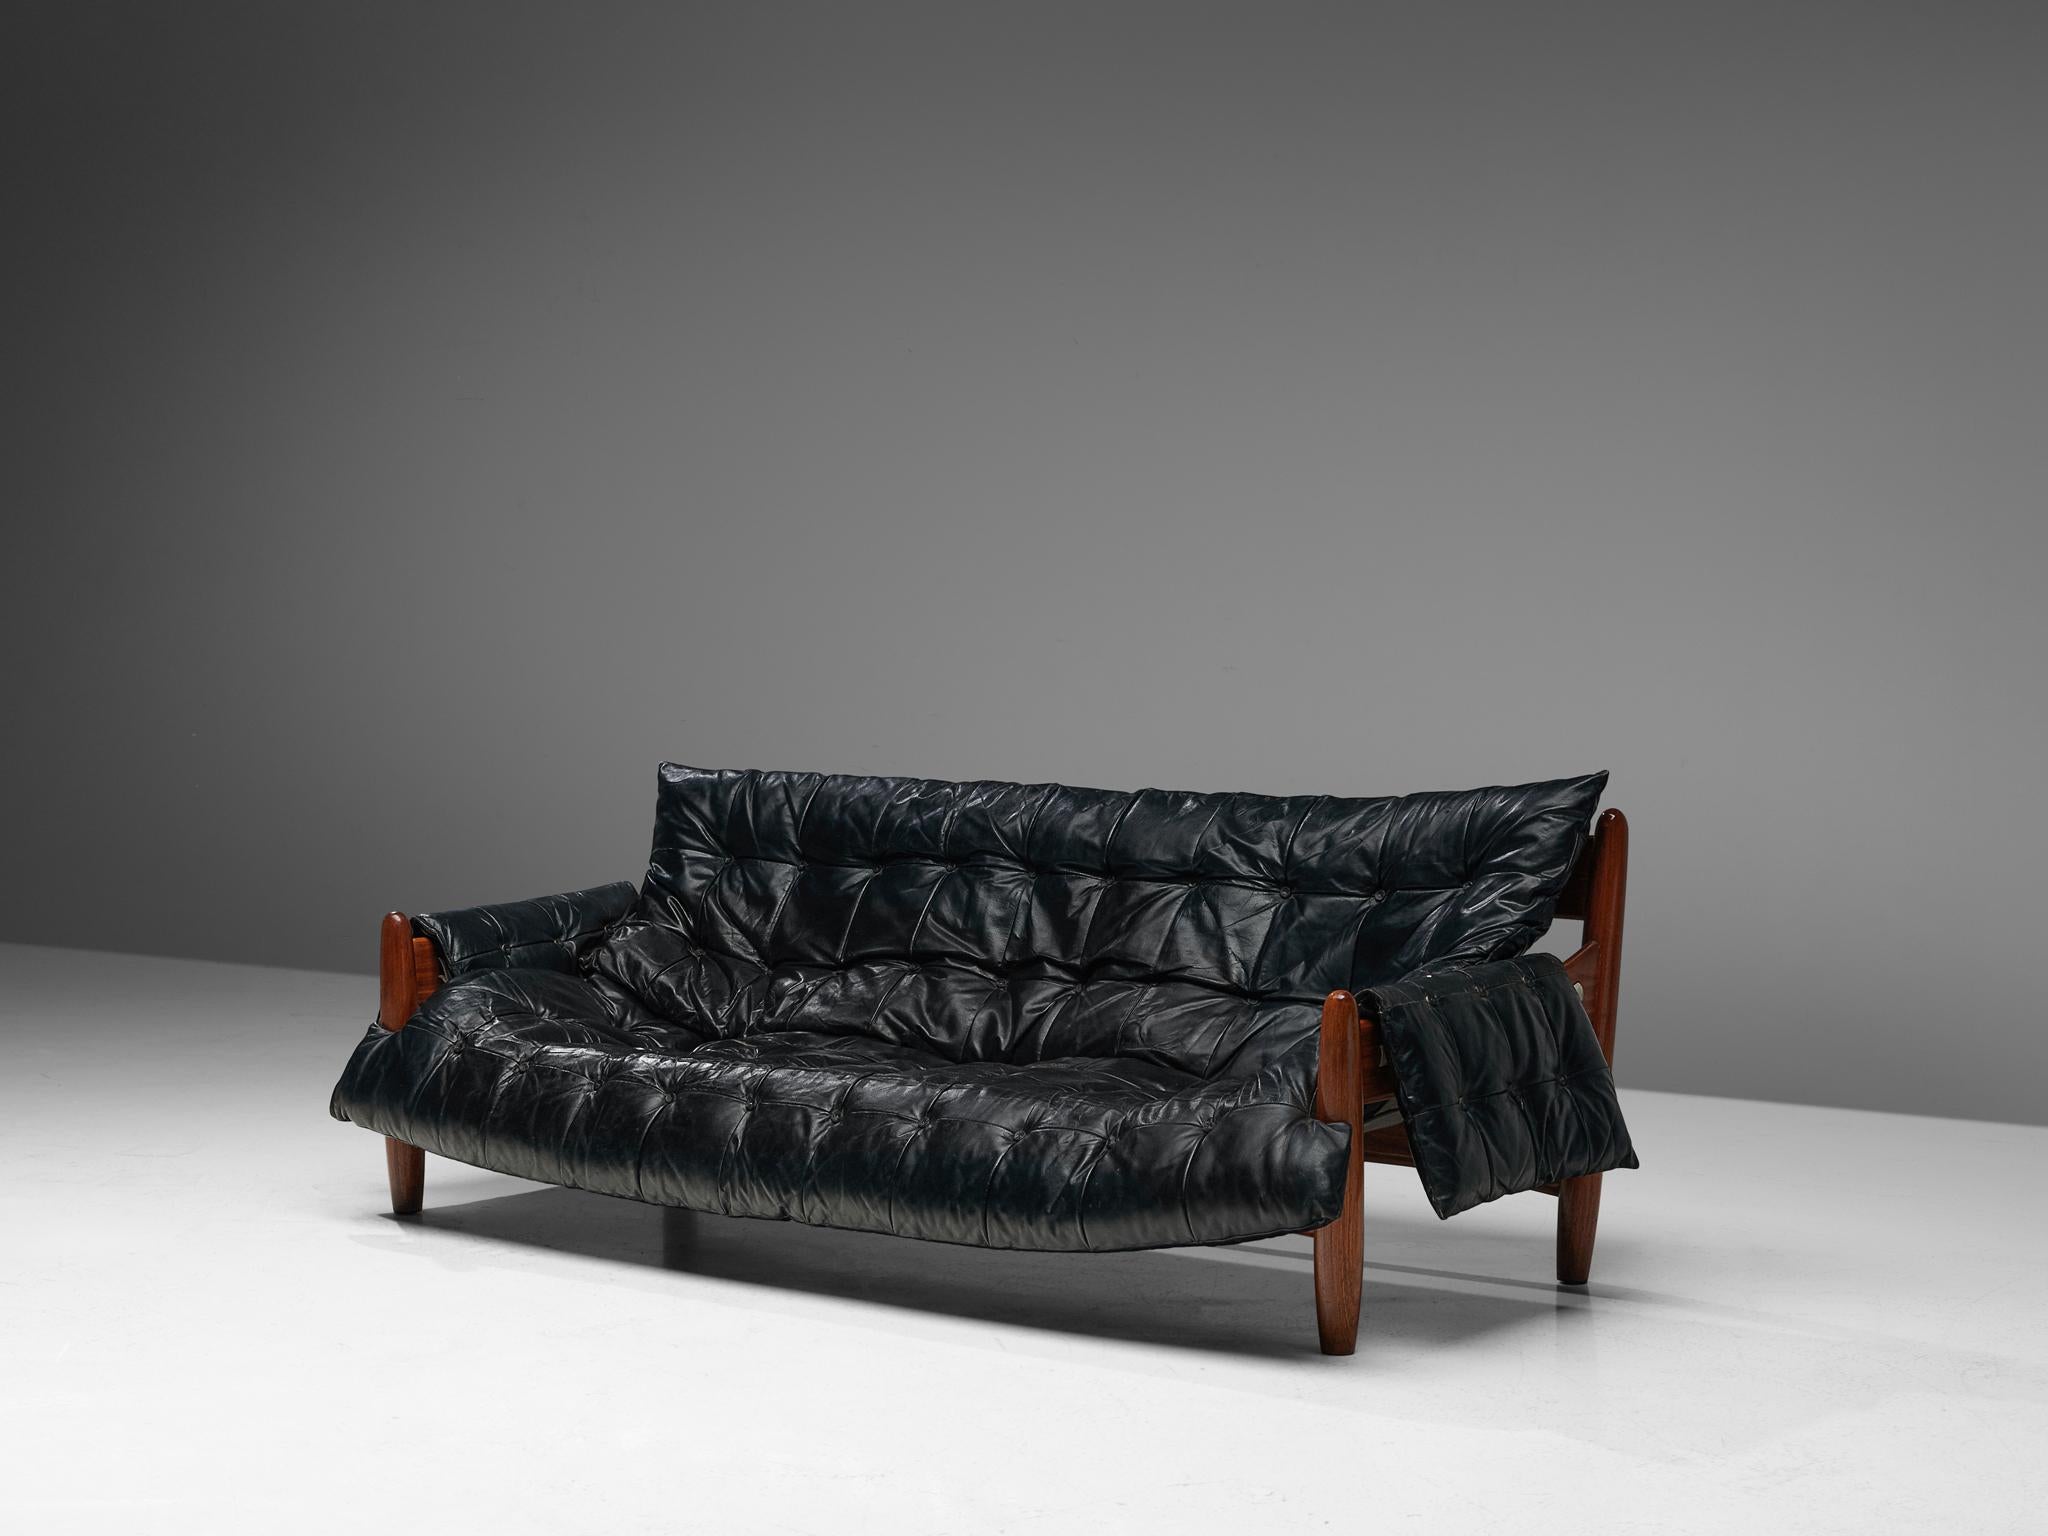 Sergio Rodrigues, 'Sheriff' sofa, black leather and imbuia wood, Brazil, 1960s

Comfortable and large sofa by Brazilian designer Sergio Rodriques. This sofa breaths the characteristics of Brazilian modern furniture design. Made of traditional